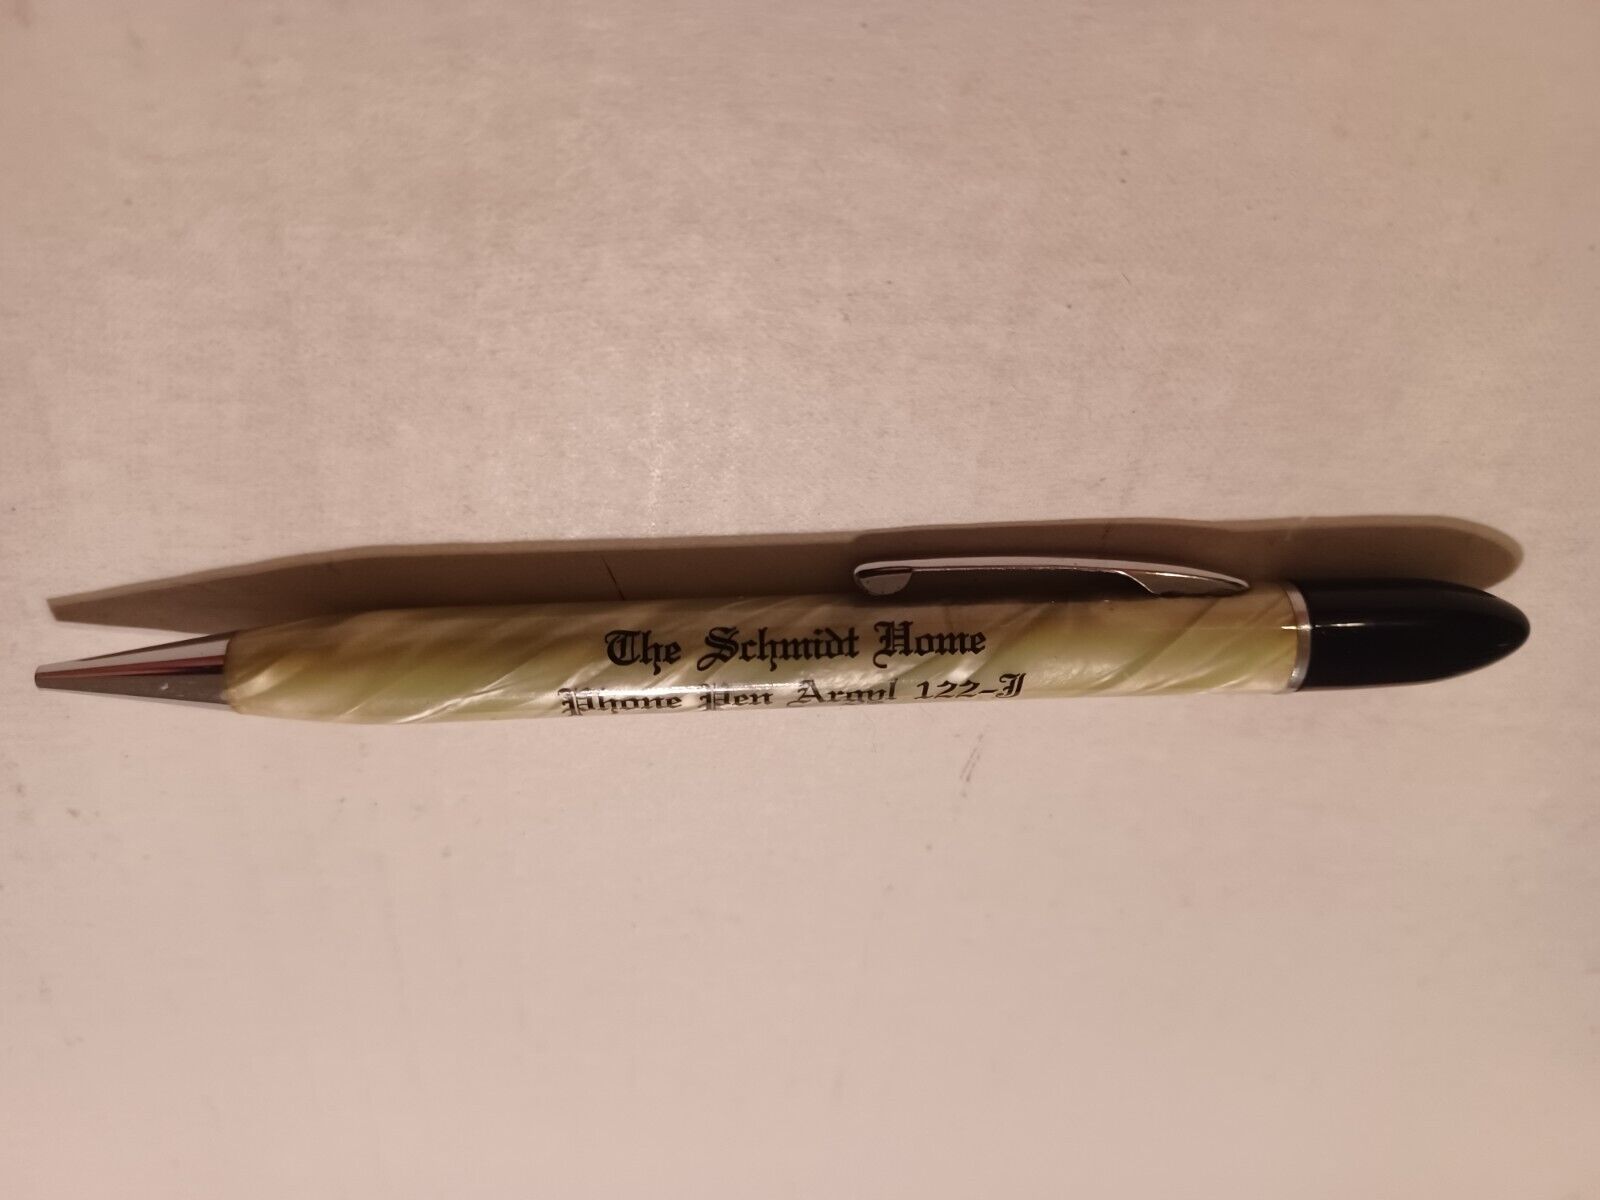 VTG 1940\'S MECHANICAL PENCIL ADVERTISING THE SCHMIDT FUNERAL HOME WIND GAP, PA.